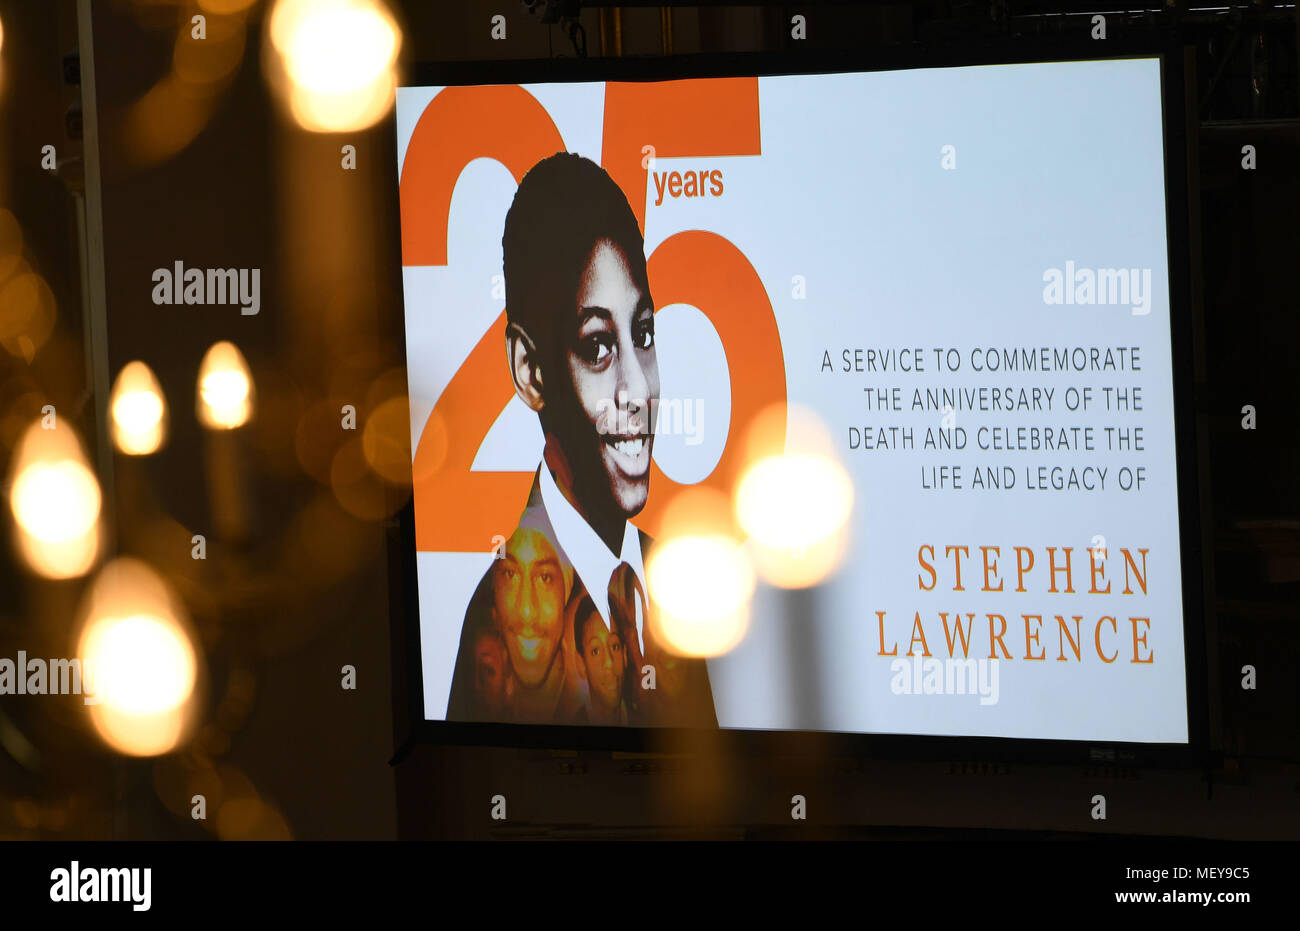 A picture of Stephen Lawrence is shown on a video screen during the memorial service at St Martin-in-the-Fields in Trafalgar Square, London to commemorate the 25th anniversary of his murder. Stock Photo